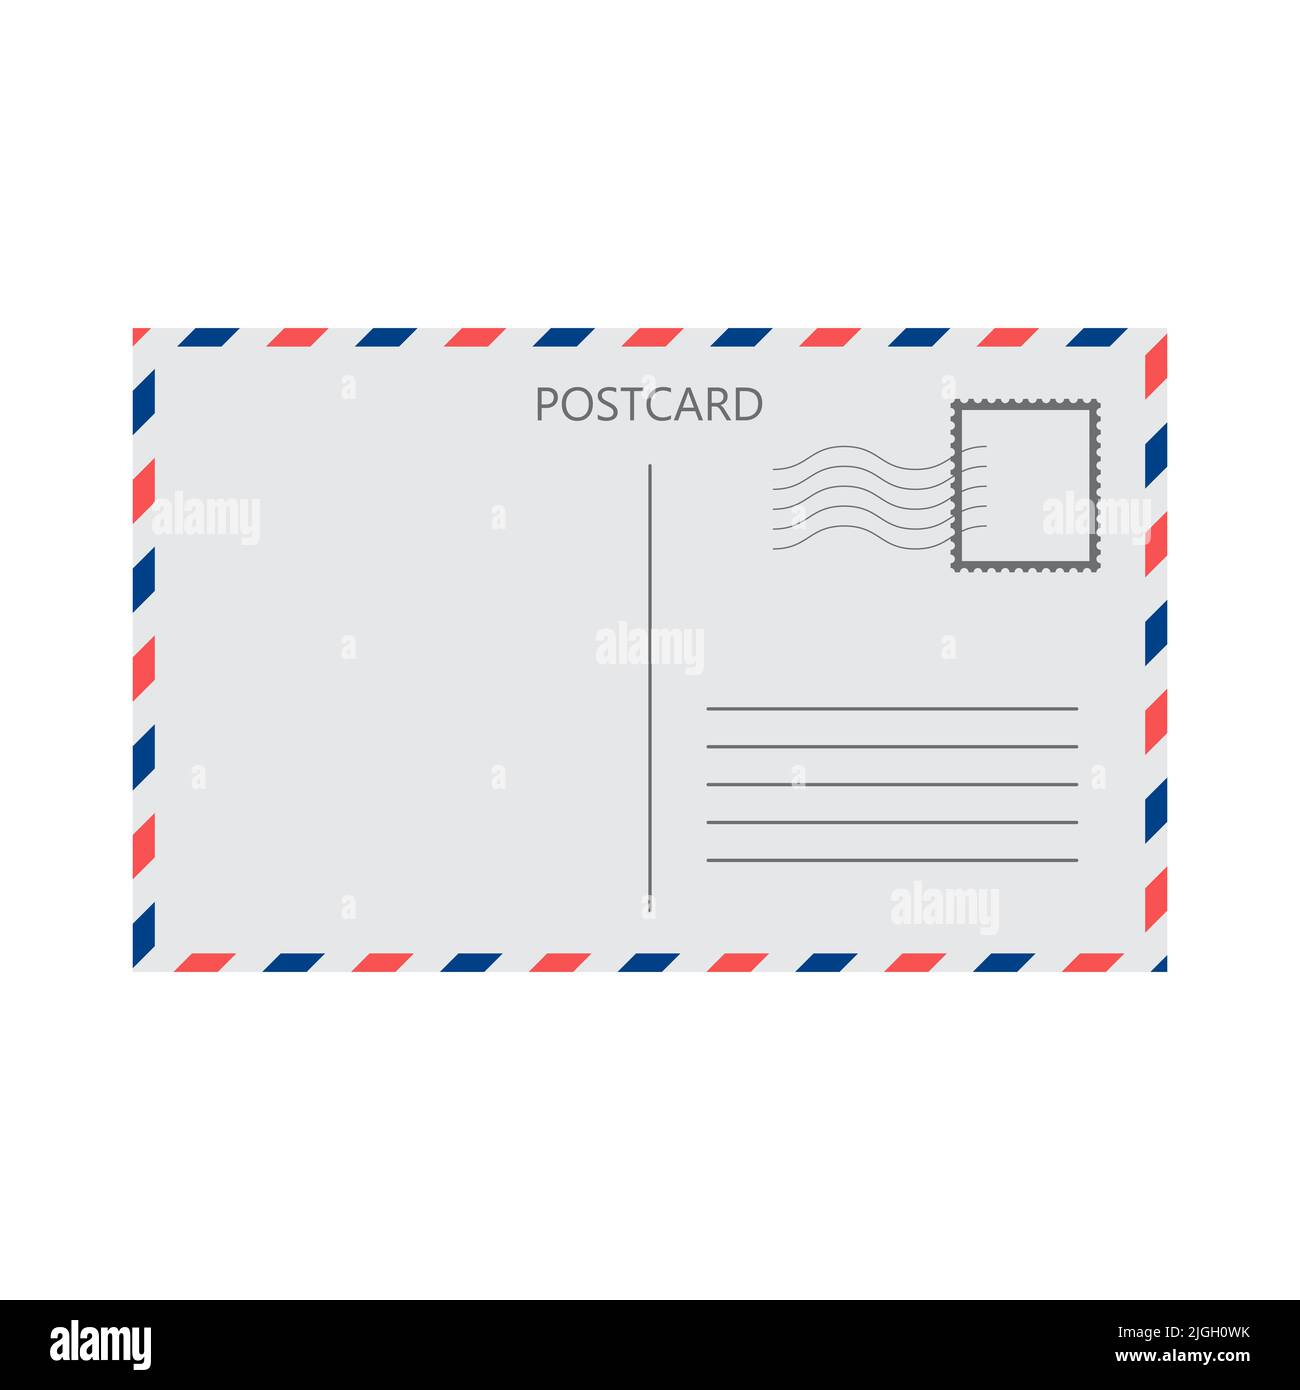 Postcard stamp Cut Out Stock Images & Pictures - Alamy